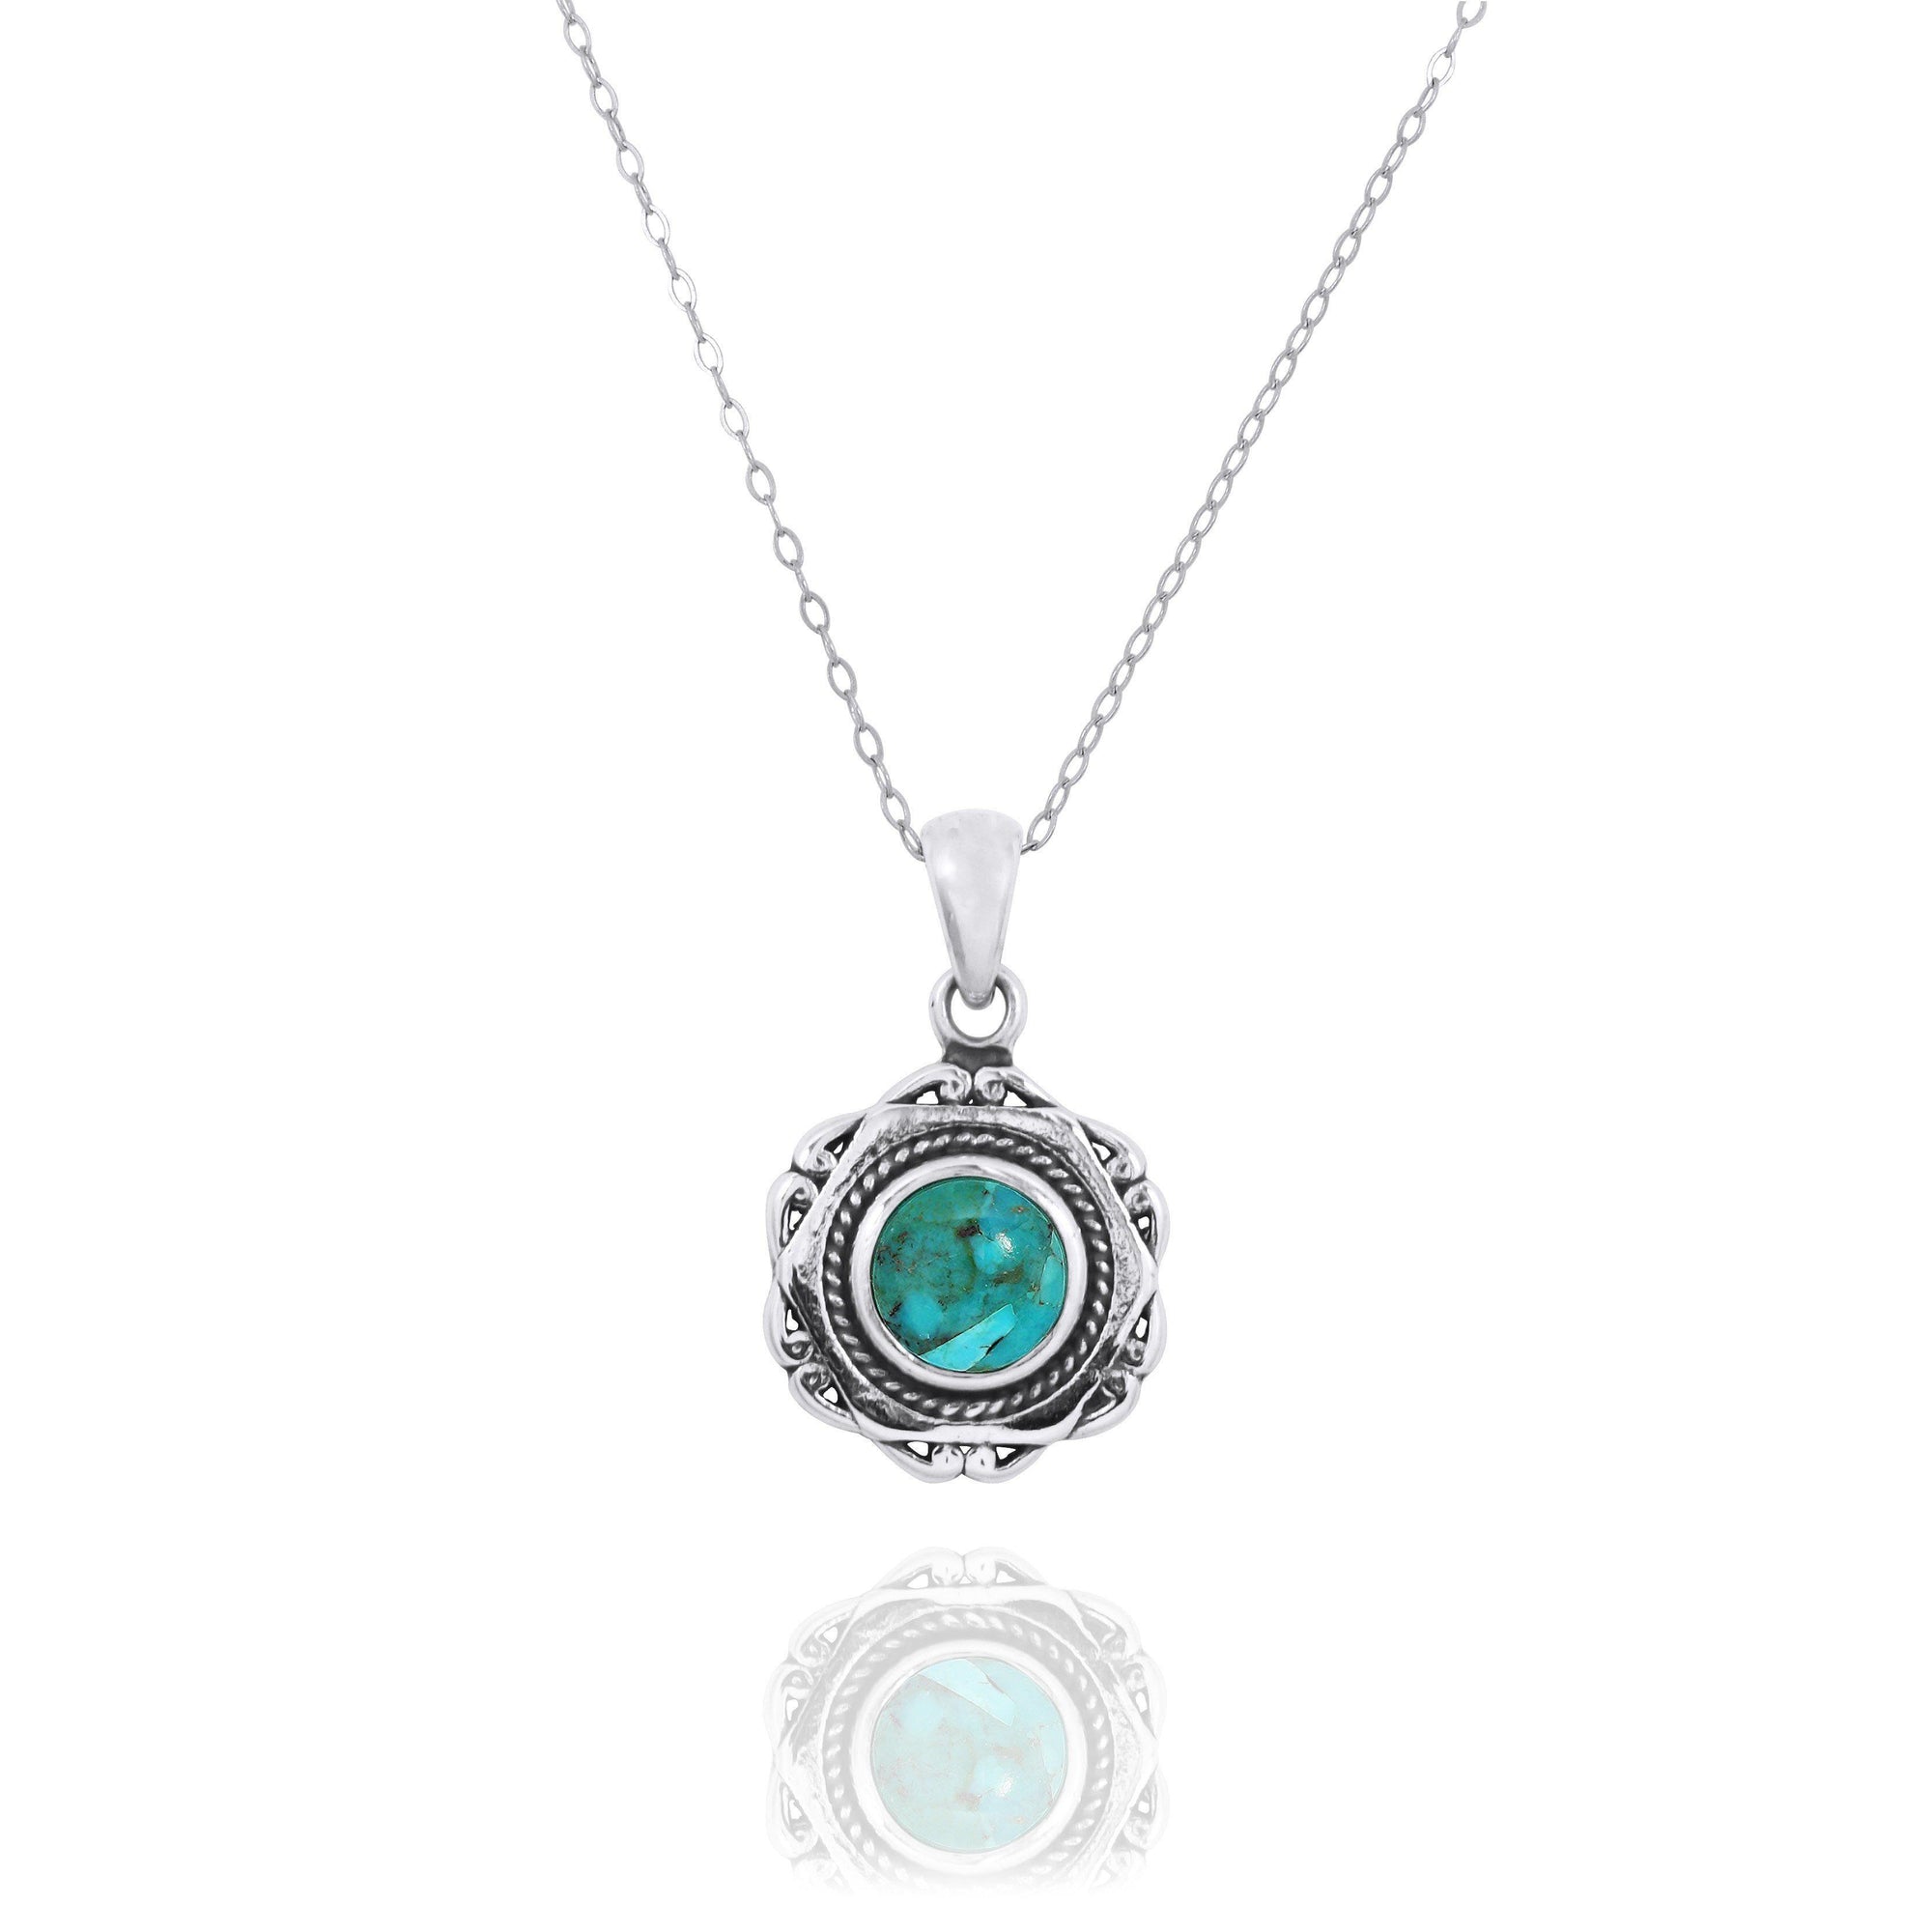 Hexagonal Shaped Oxidized Silver Pendant with Round Compressed Turquoise